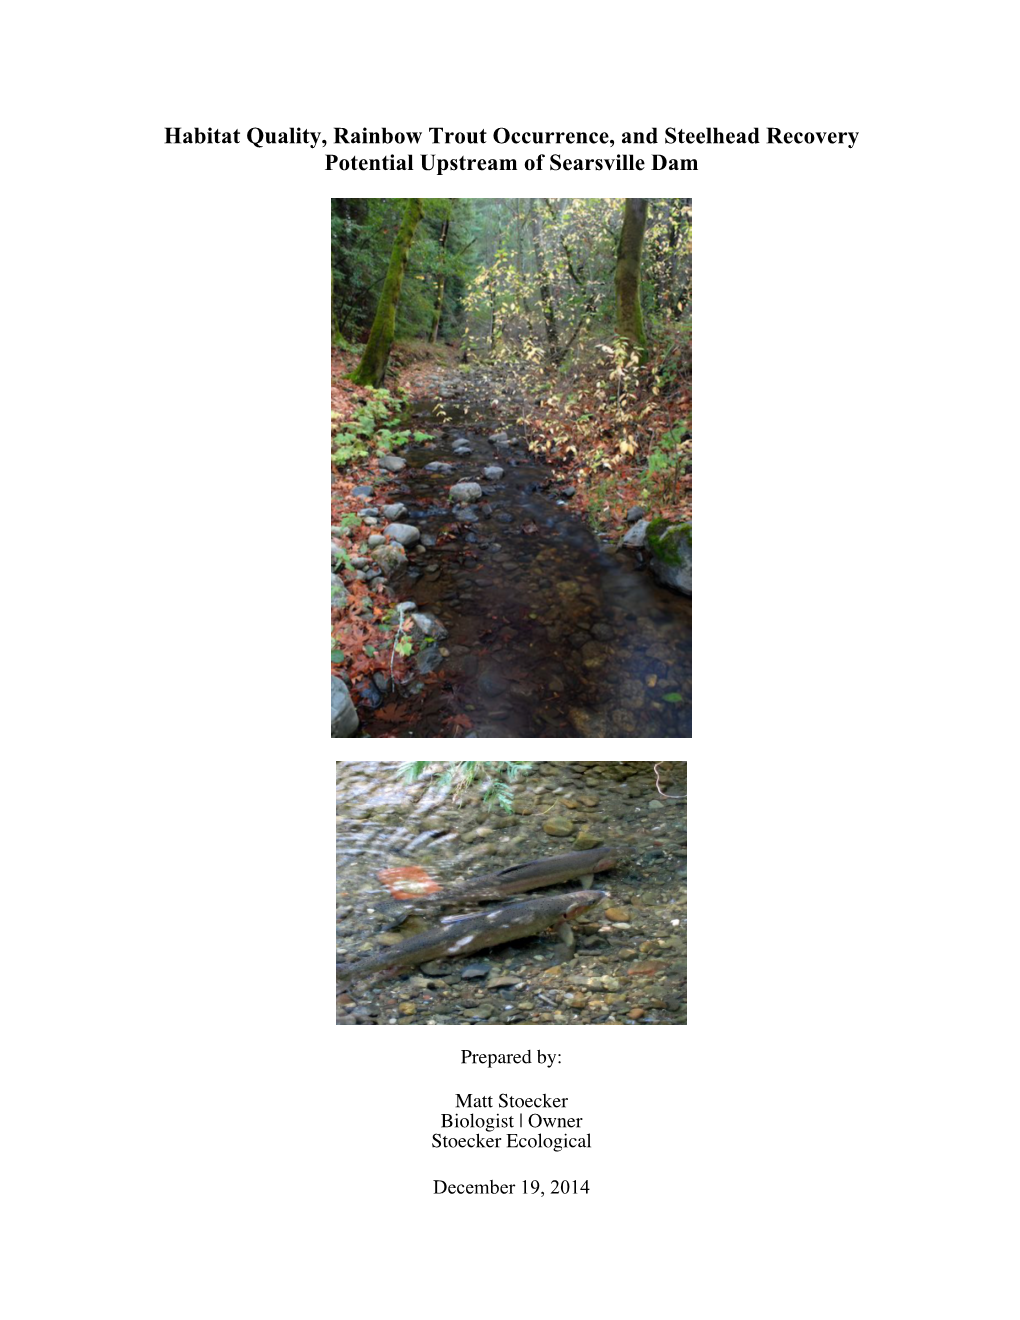 Habitat Quality, Rainbow Trout Occurrence, and Steelhead Recovery Potential Upstream of Searsville Dam